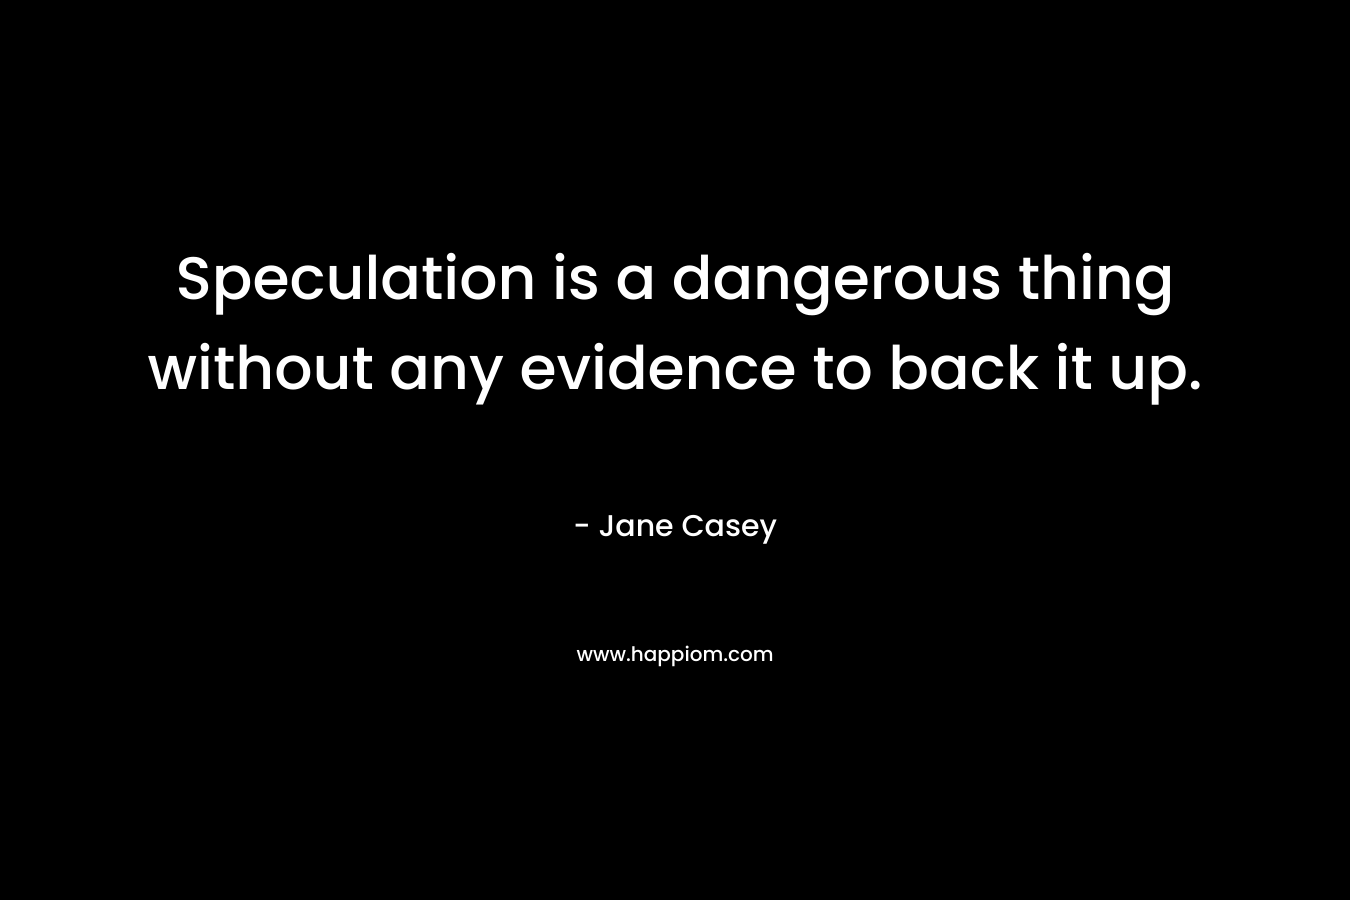 Speculation is a dangerous thing without any evidence to back it up.